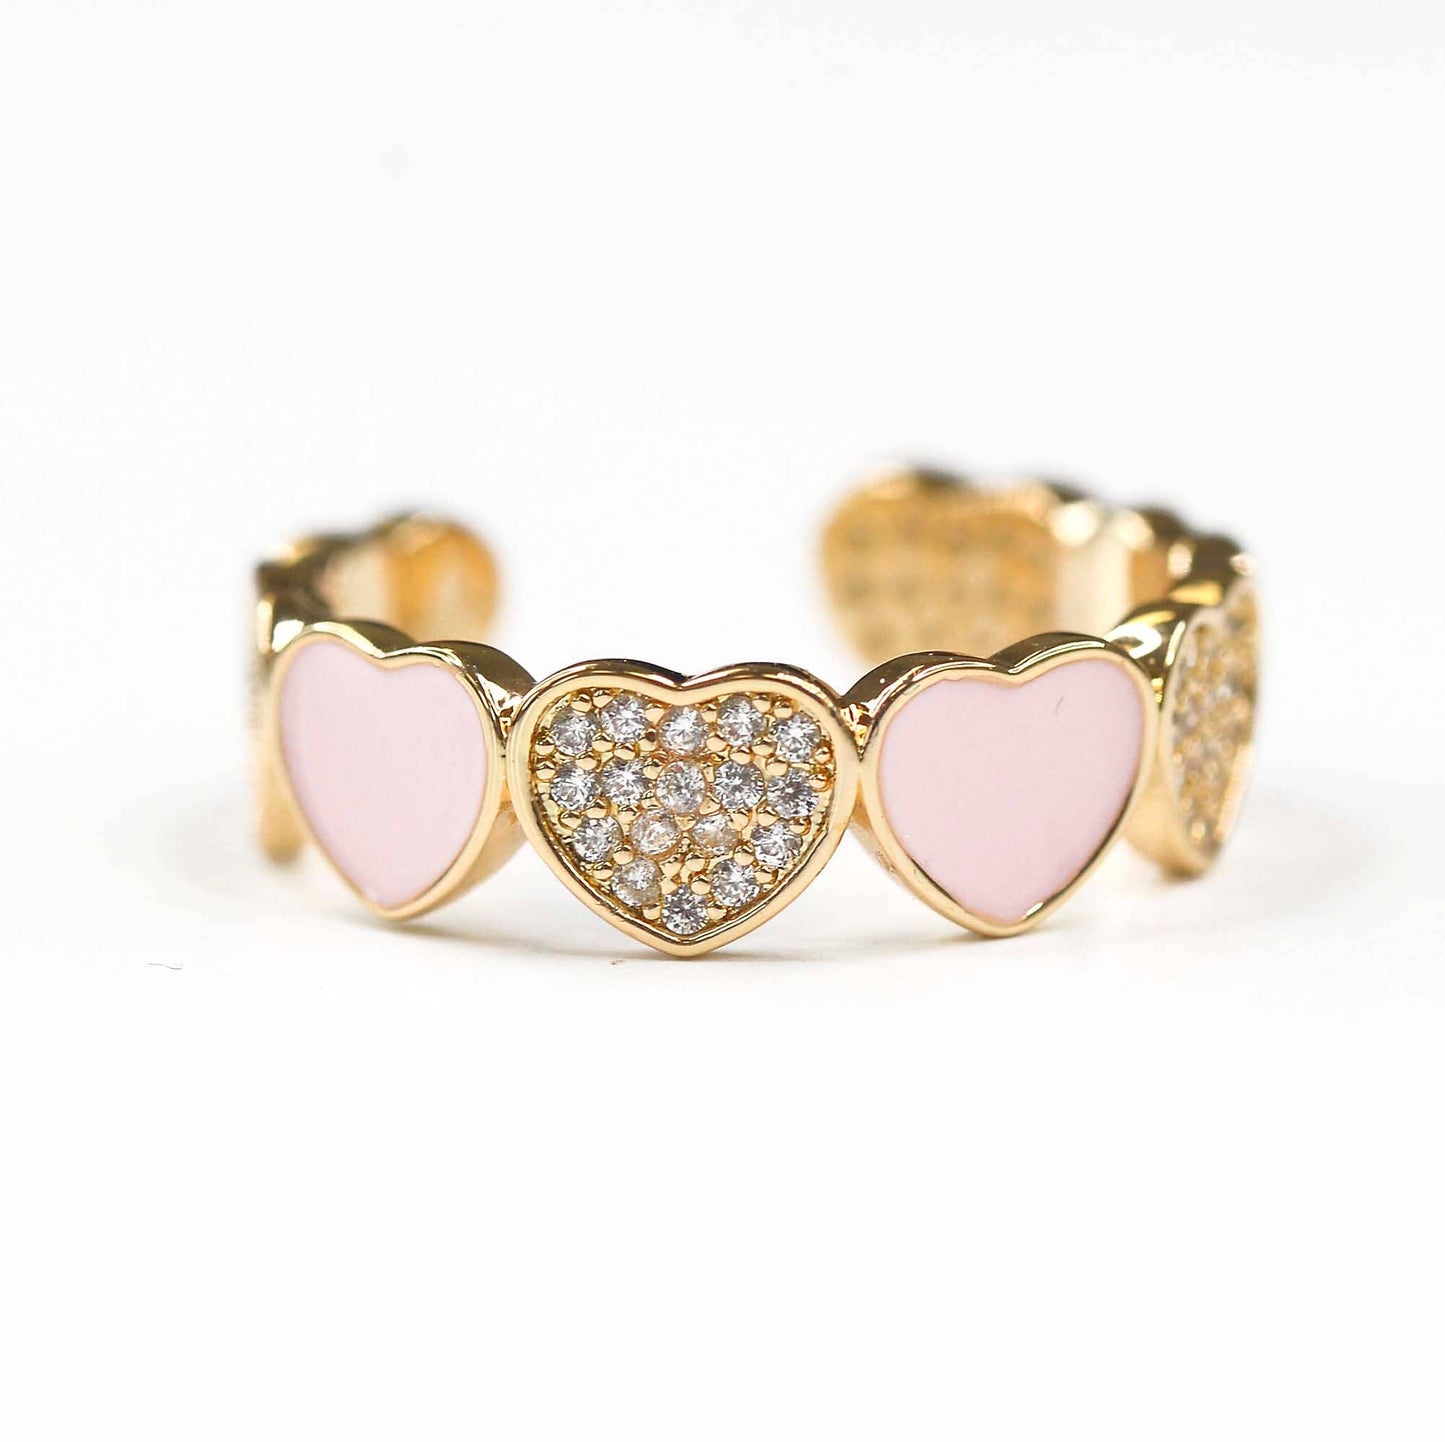 Heart Adjustable Ring, Cute Fun Ring, Stackable Ring